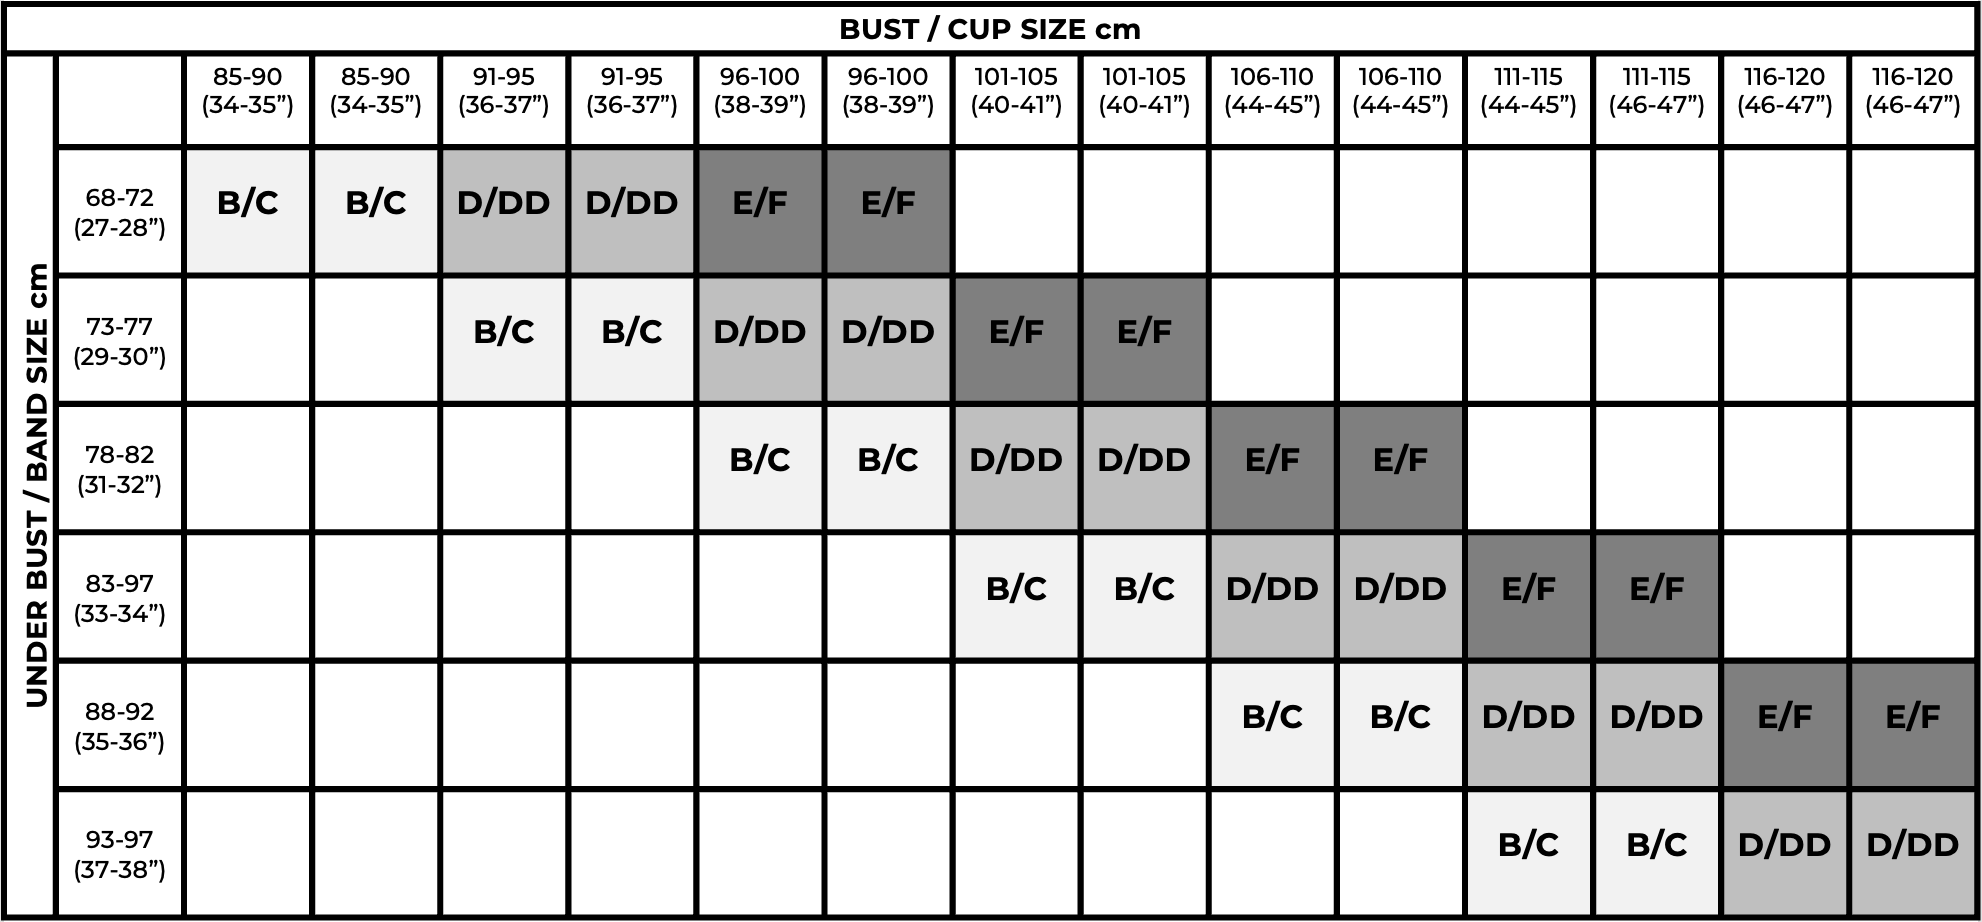 DUAL CUP SIZING